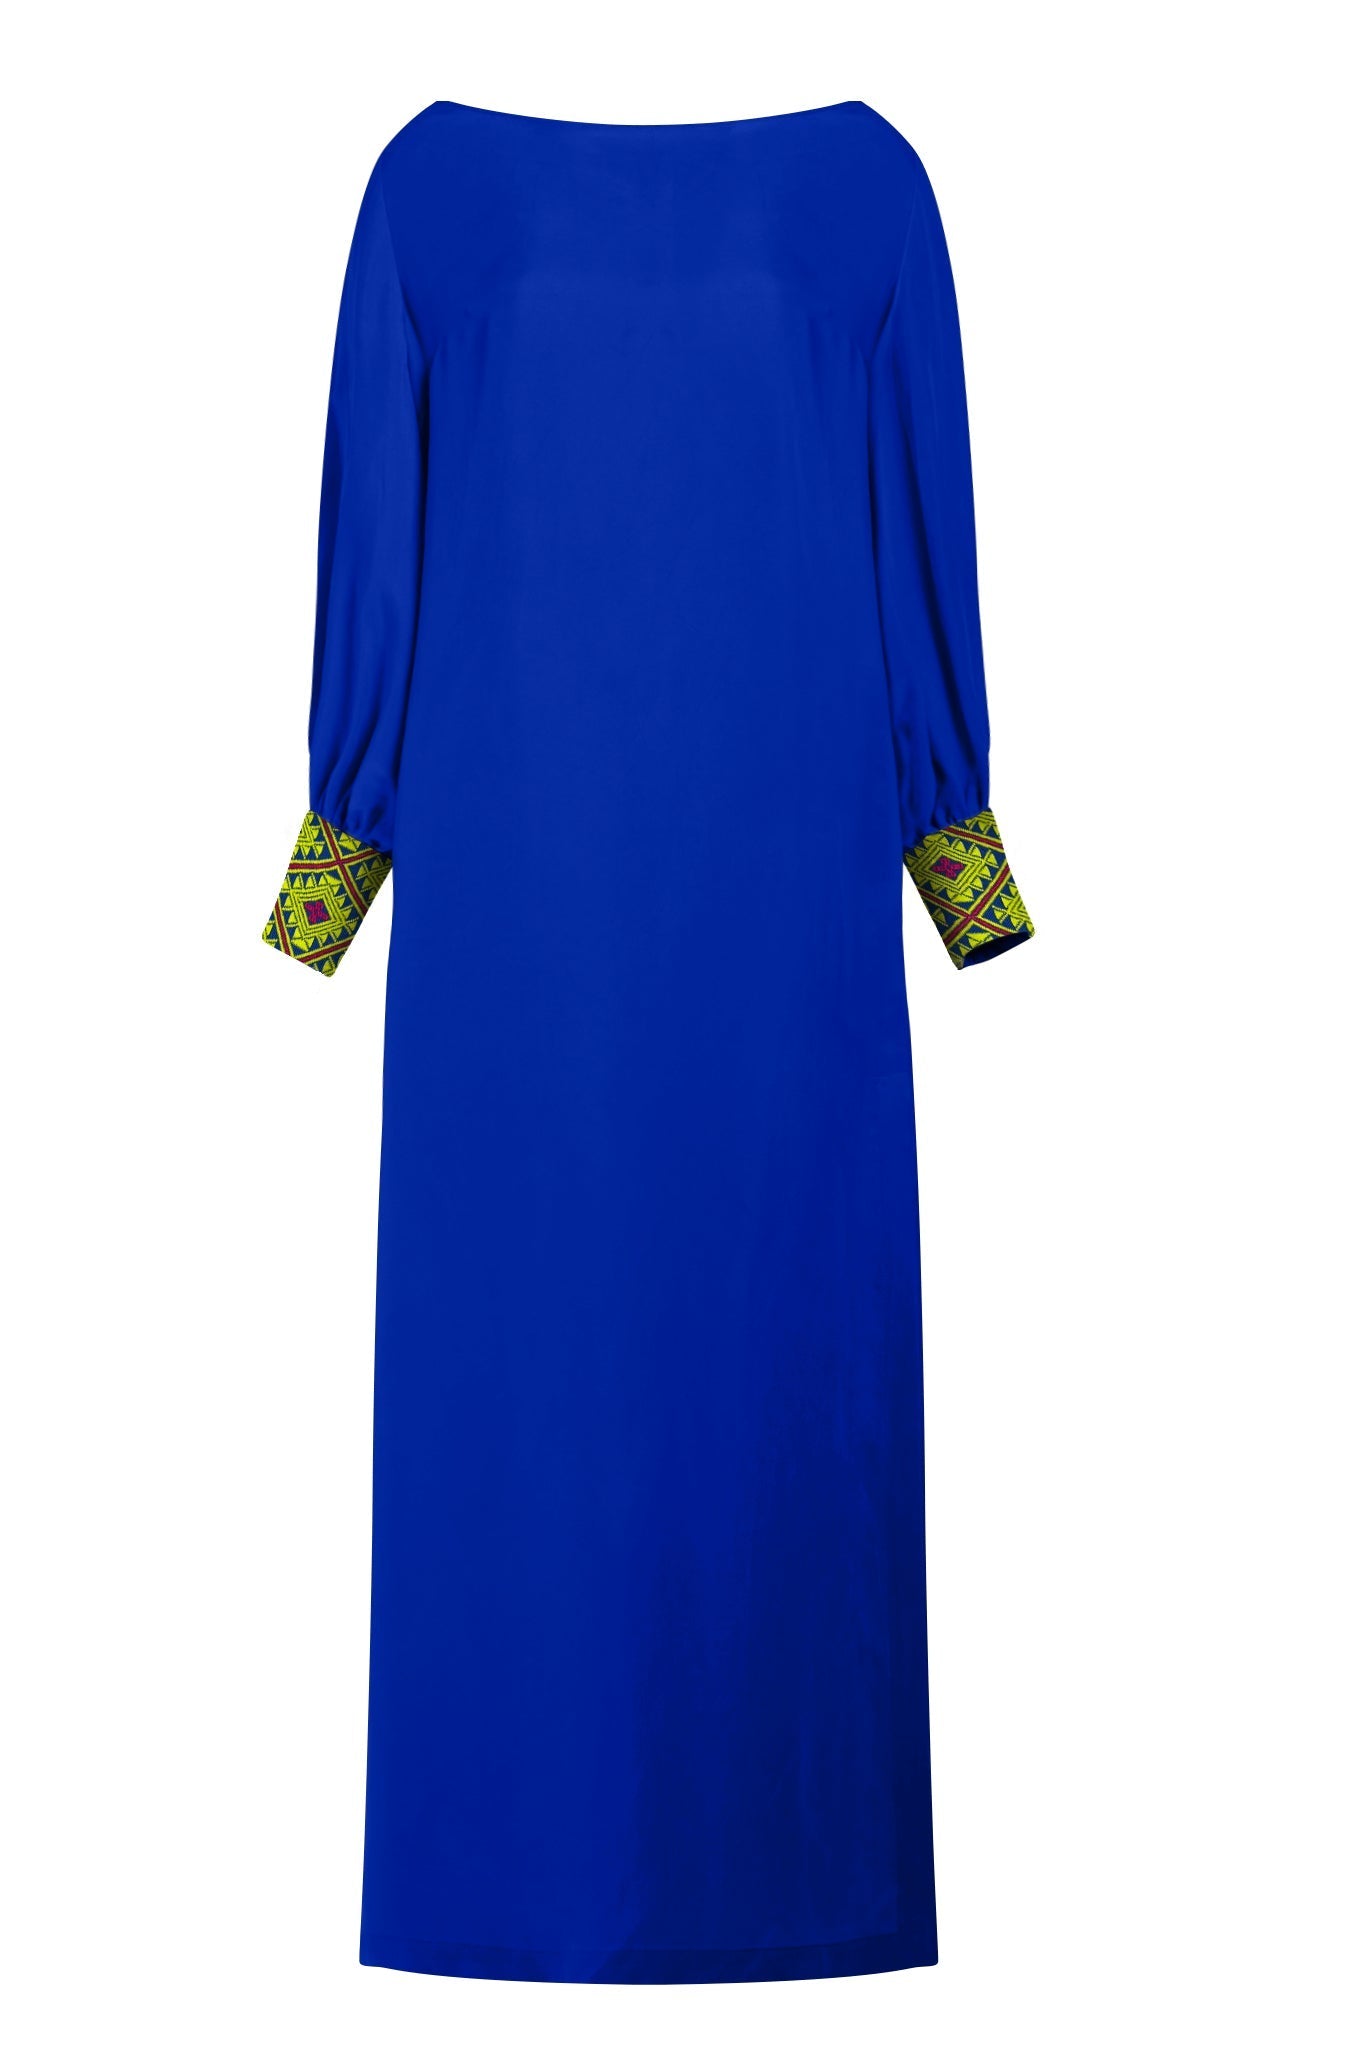 close up view of royal blue kaftan duster with embroidered sleeves made from recycled materials 3